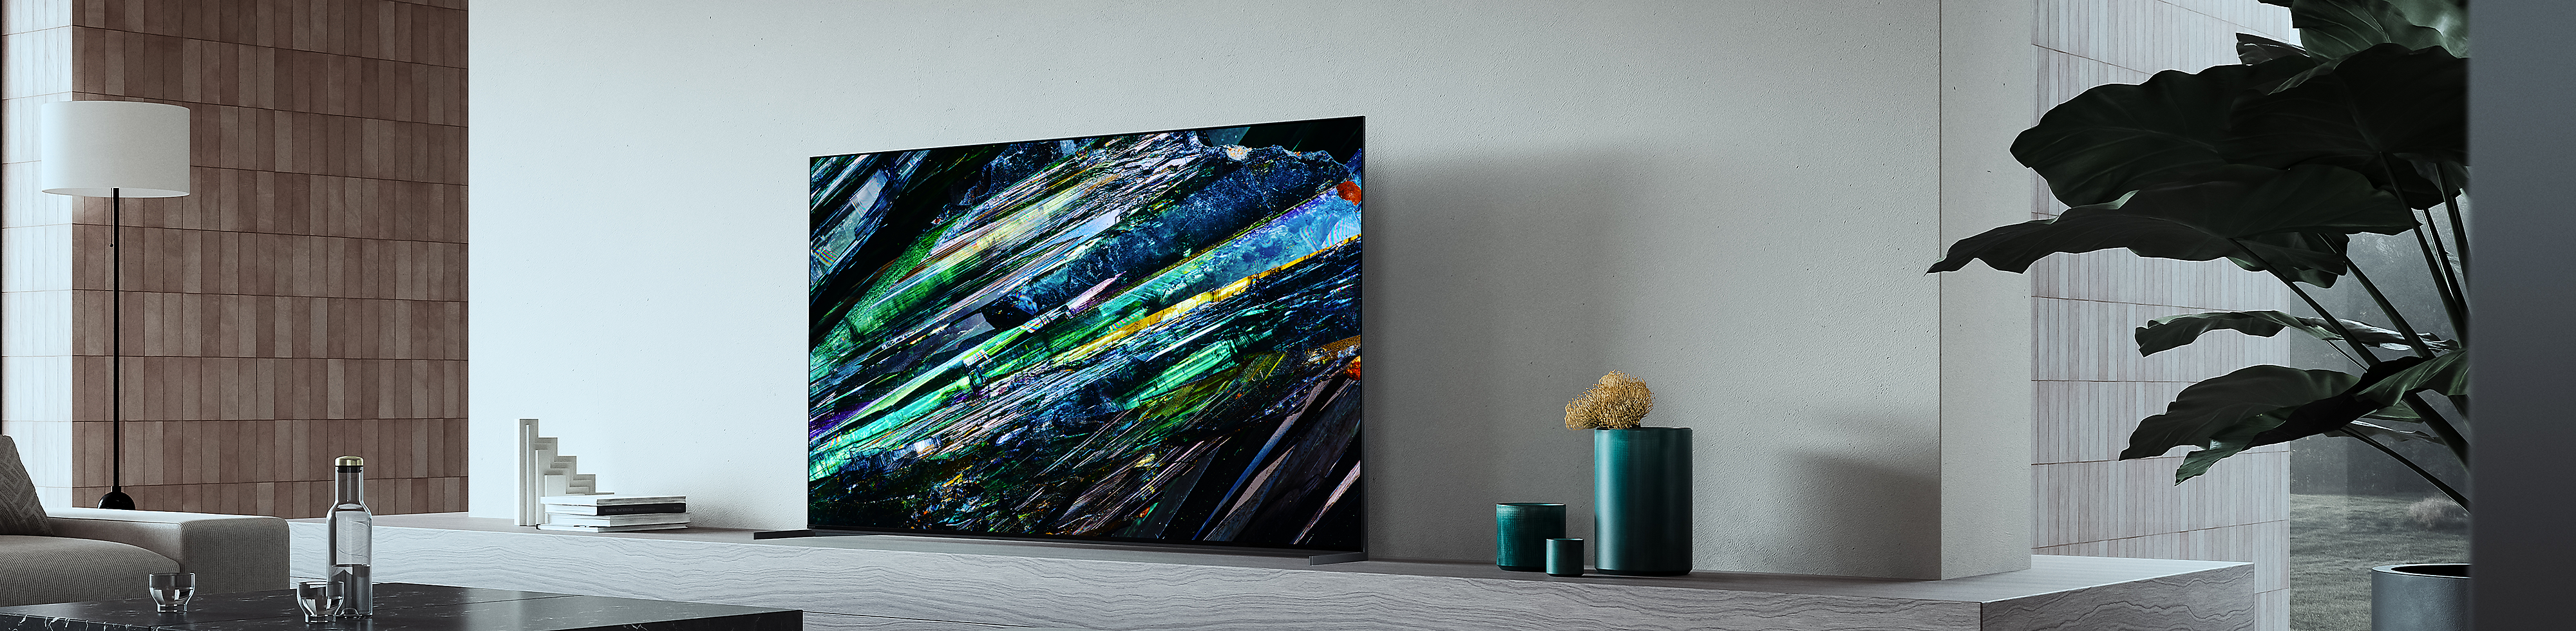 Four BRAVIA XR TVs displaying full-screen images of different types of crystal in incredible detail and colour